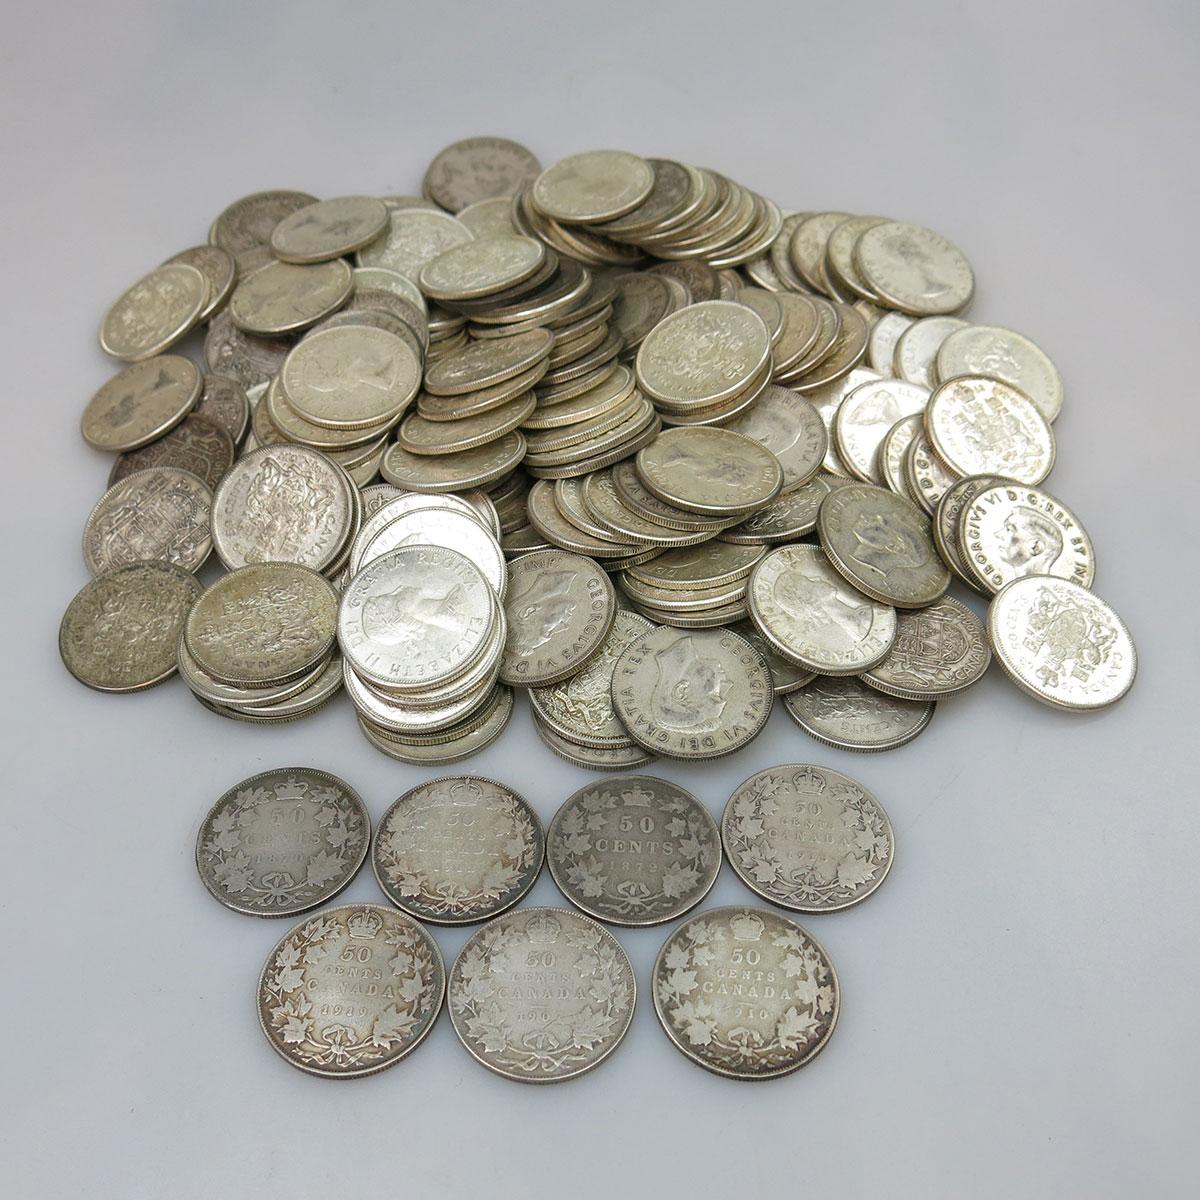 202 Various Canadian Silver Fifty Cent Coins